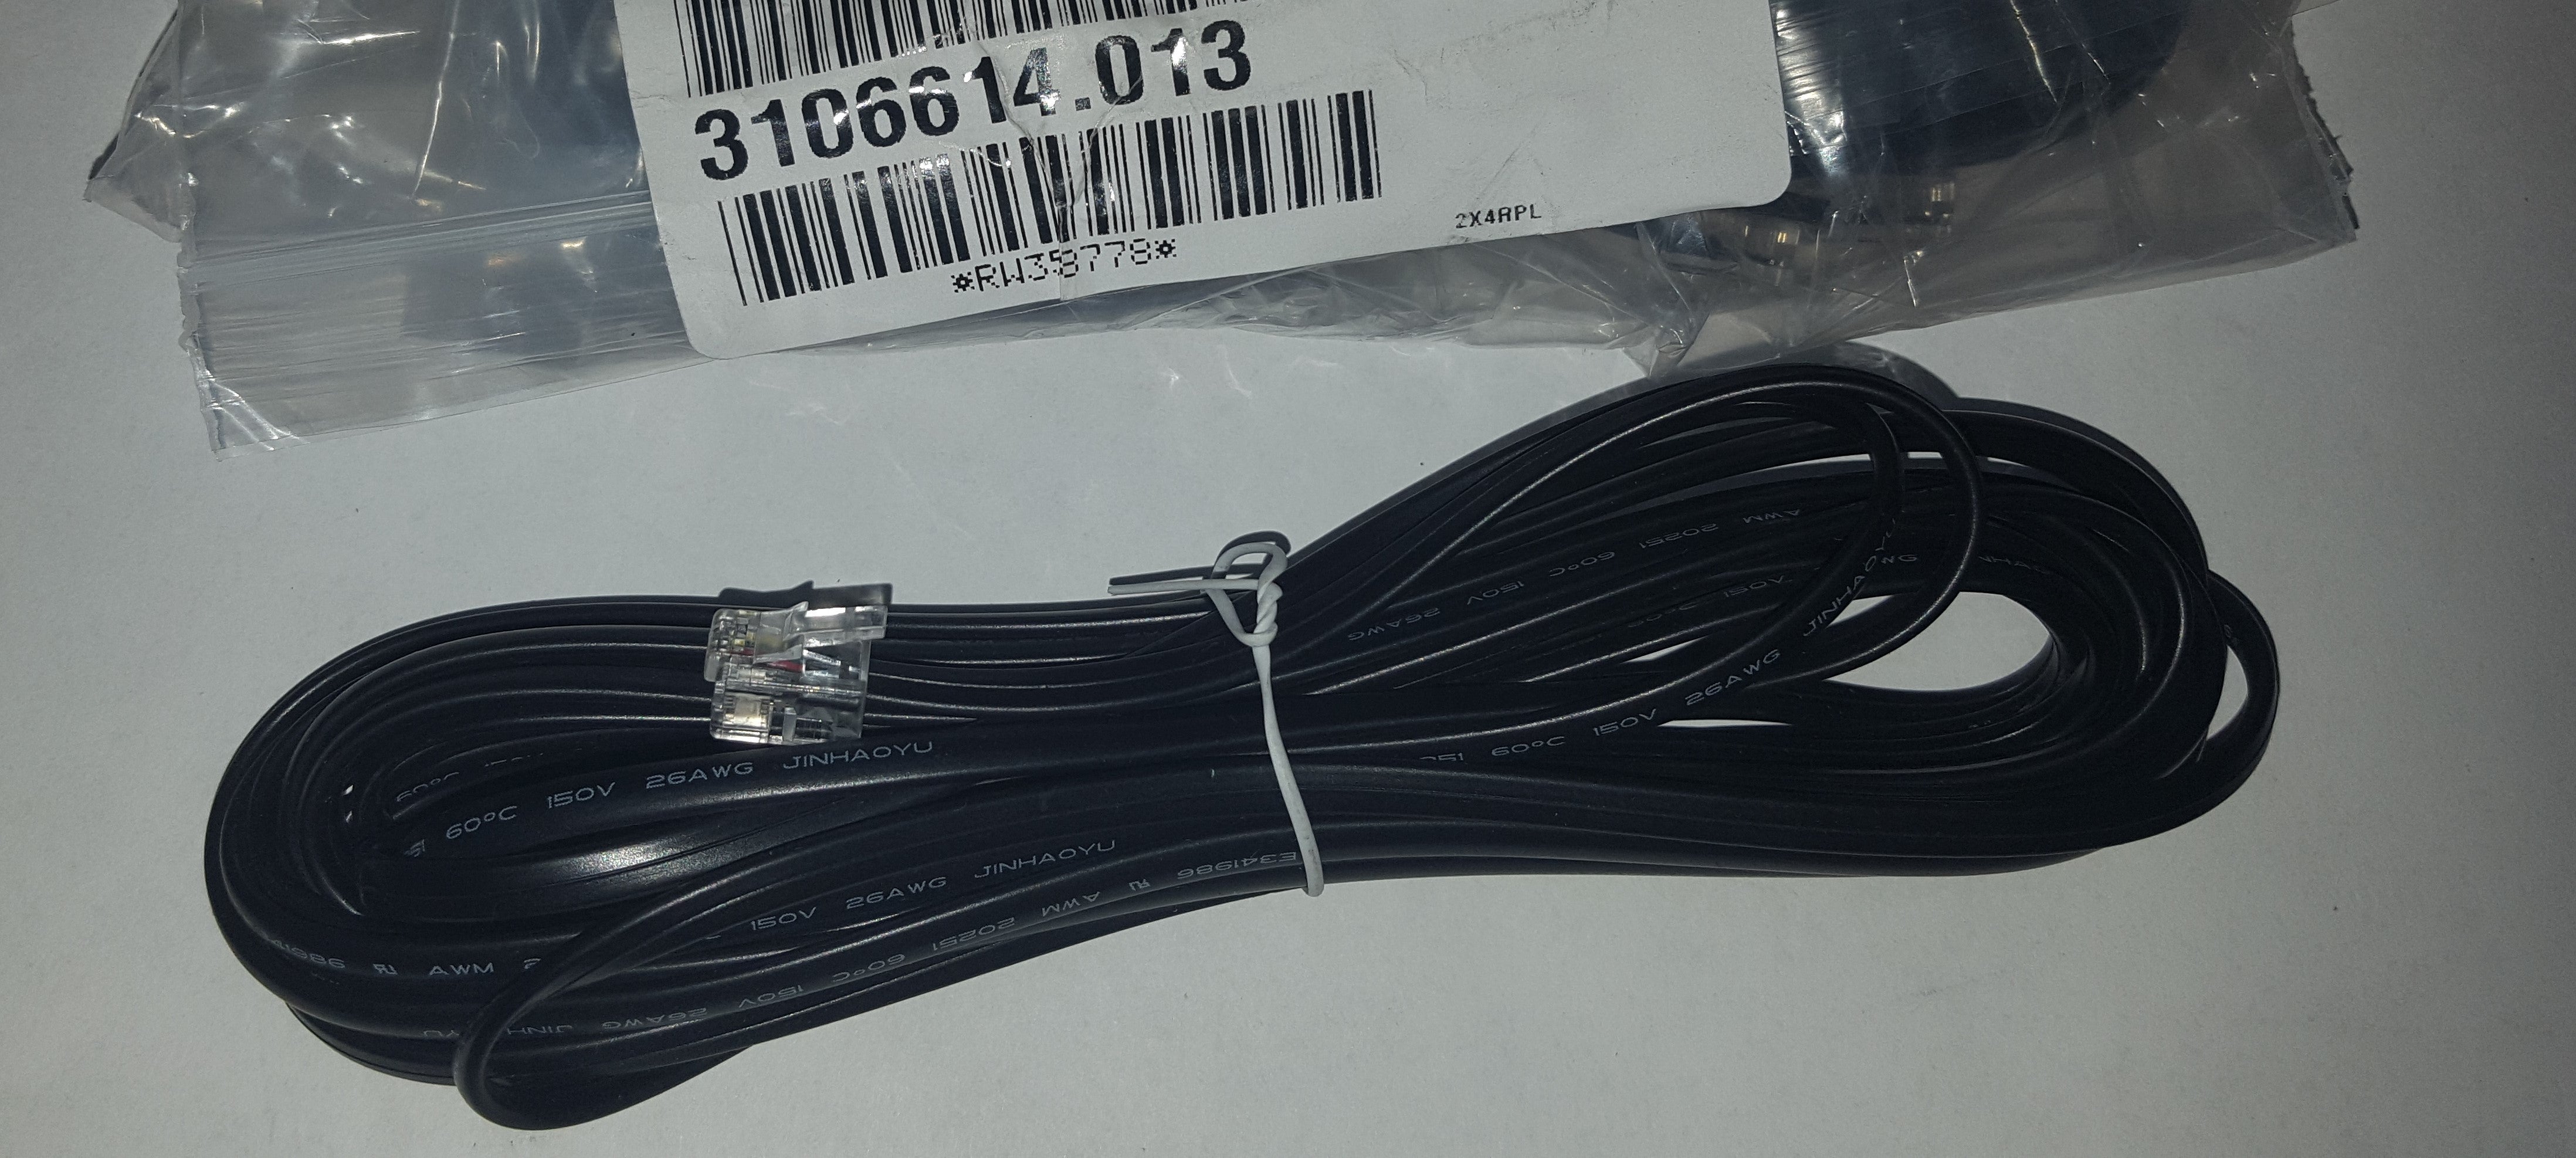 Dometic 3106614.013 Air Conditioner 18' Communication Cable